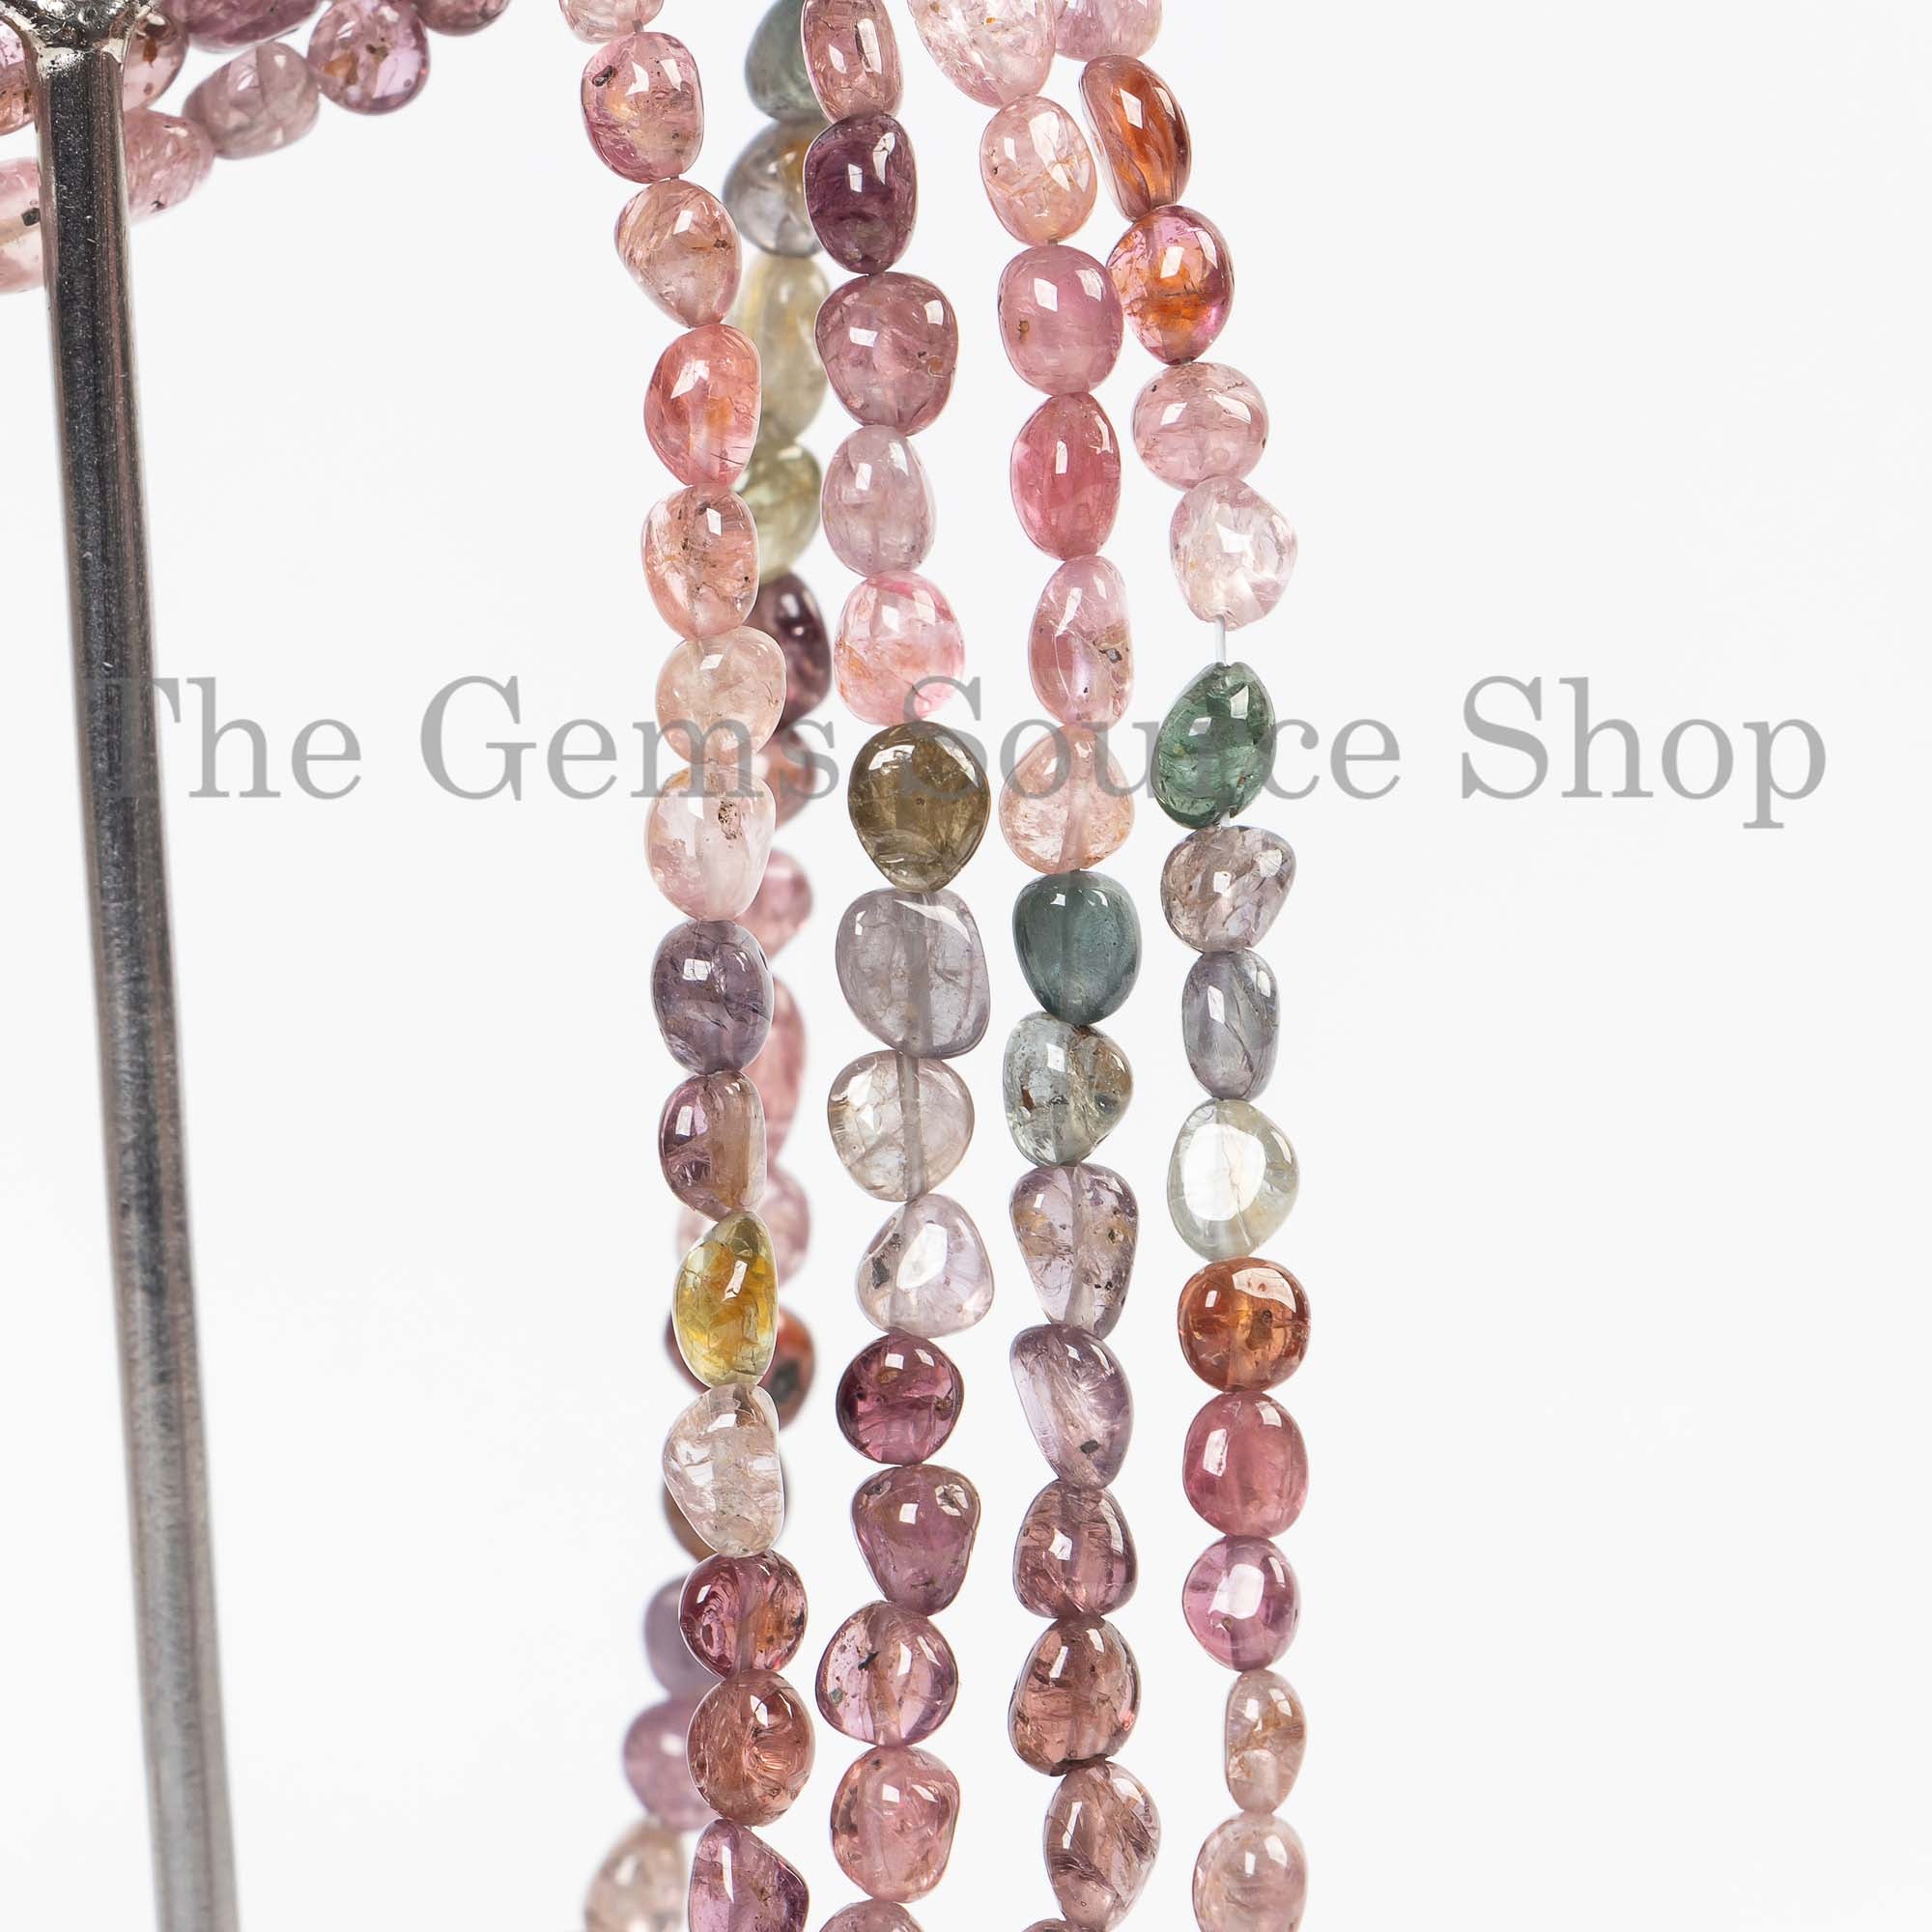 4x5-5x6m Multi Spinel Nuggets Beads, Multi Spinel Beads, Smooth Fancy Beads, Fancy Nugget Beads, Smooth Beads, Multi Spinel Gemstone